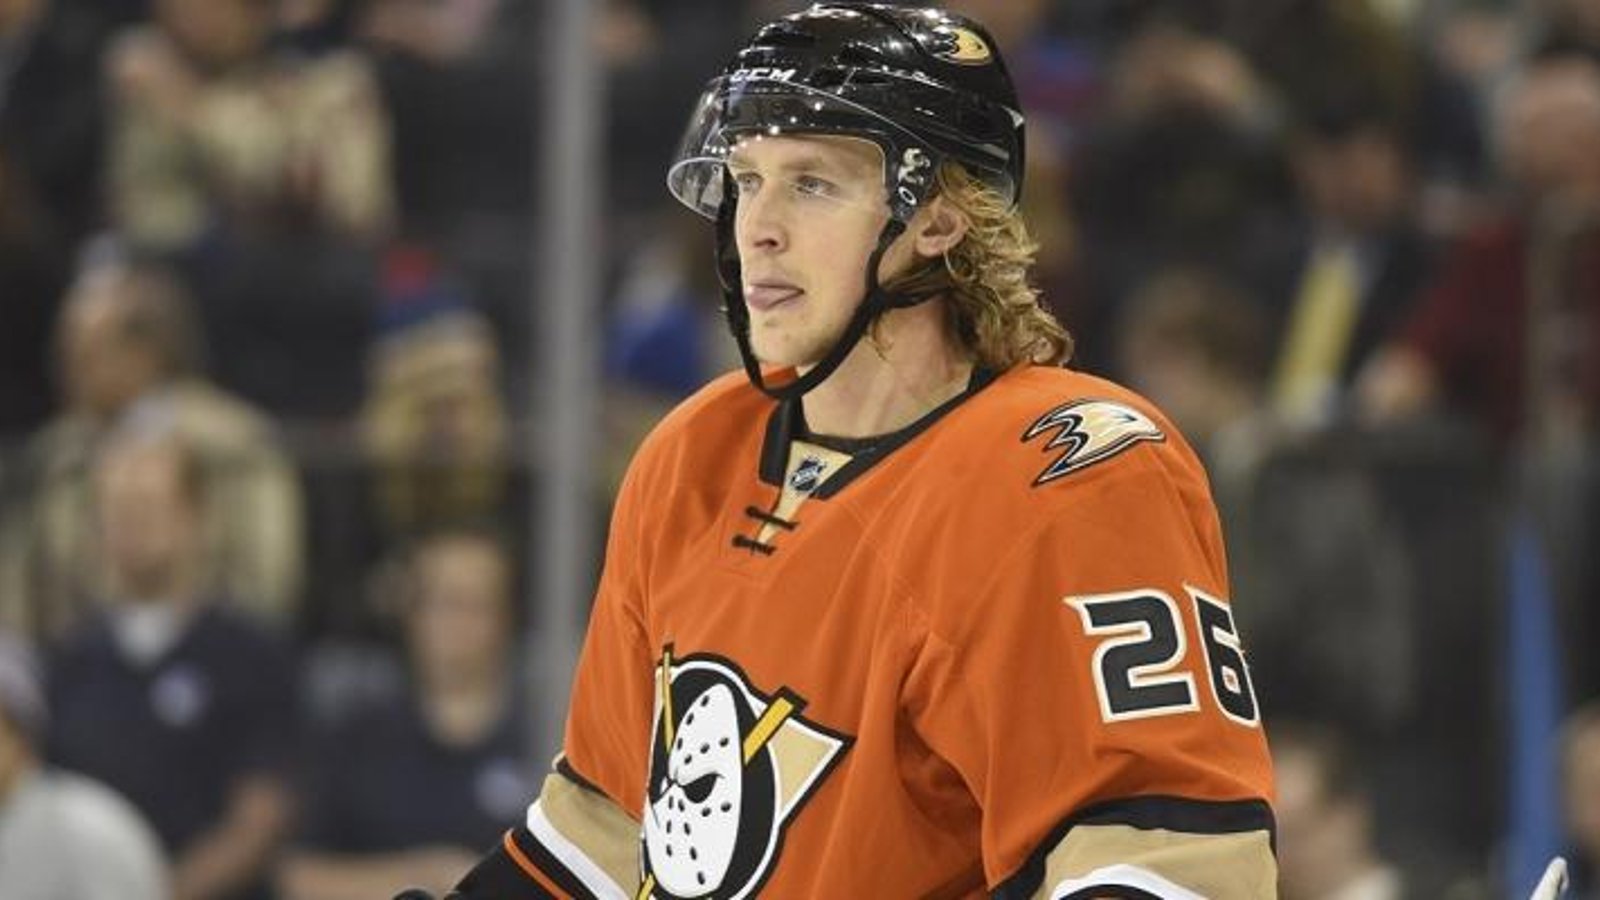 Carl Hagelin scores his first goal since the trade against his former team.